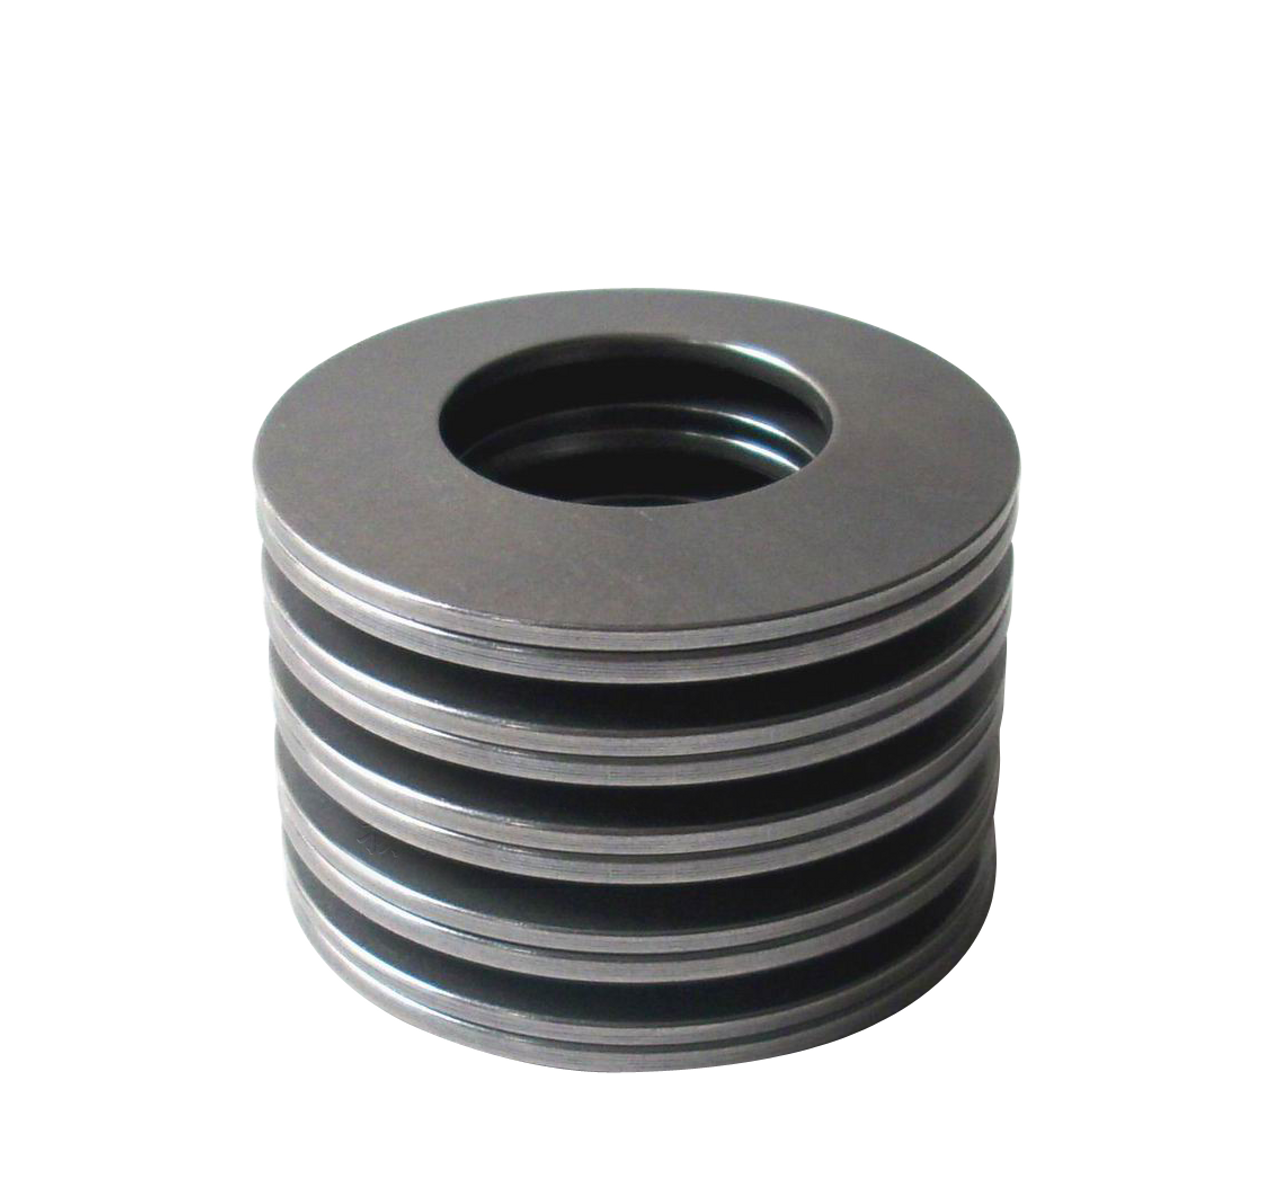 30mm Disc Spring (DIN 2093) Conical Washer  DS031.0-063-03